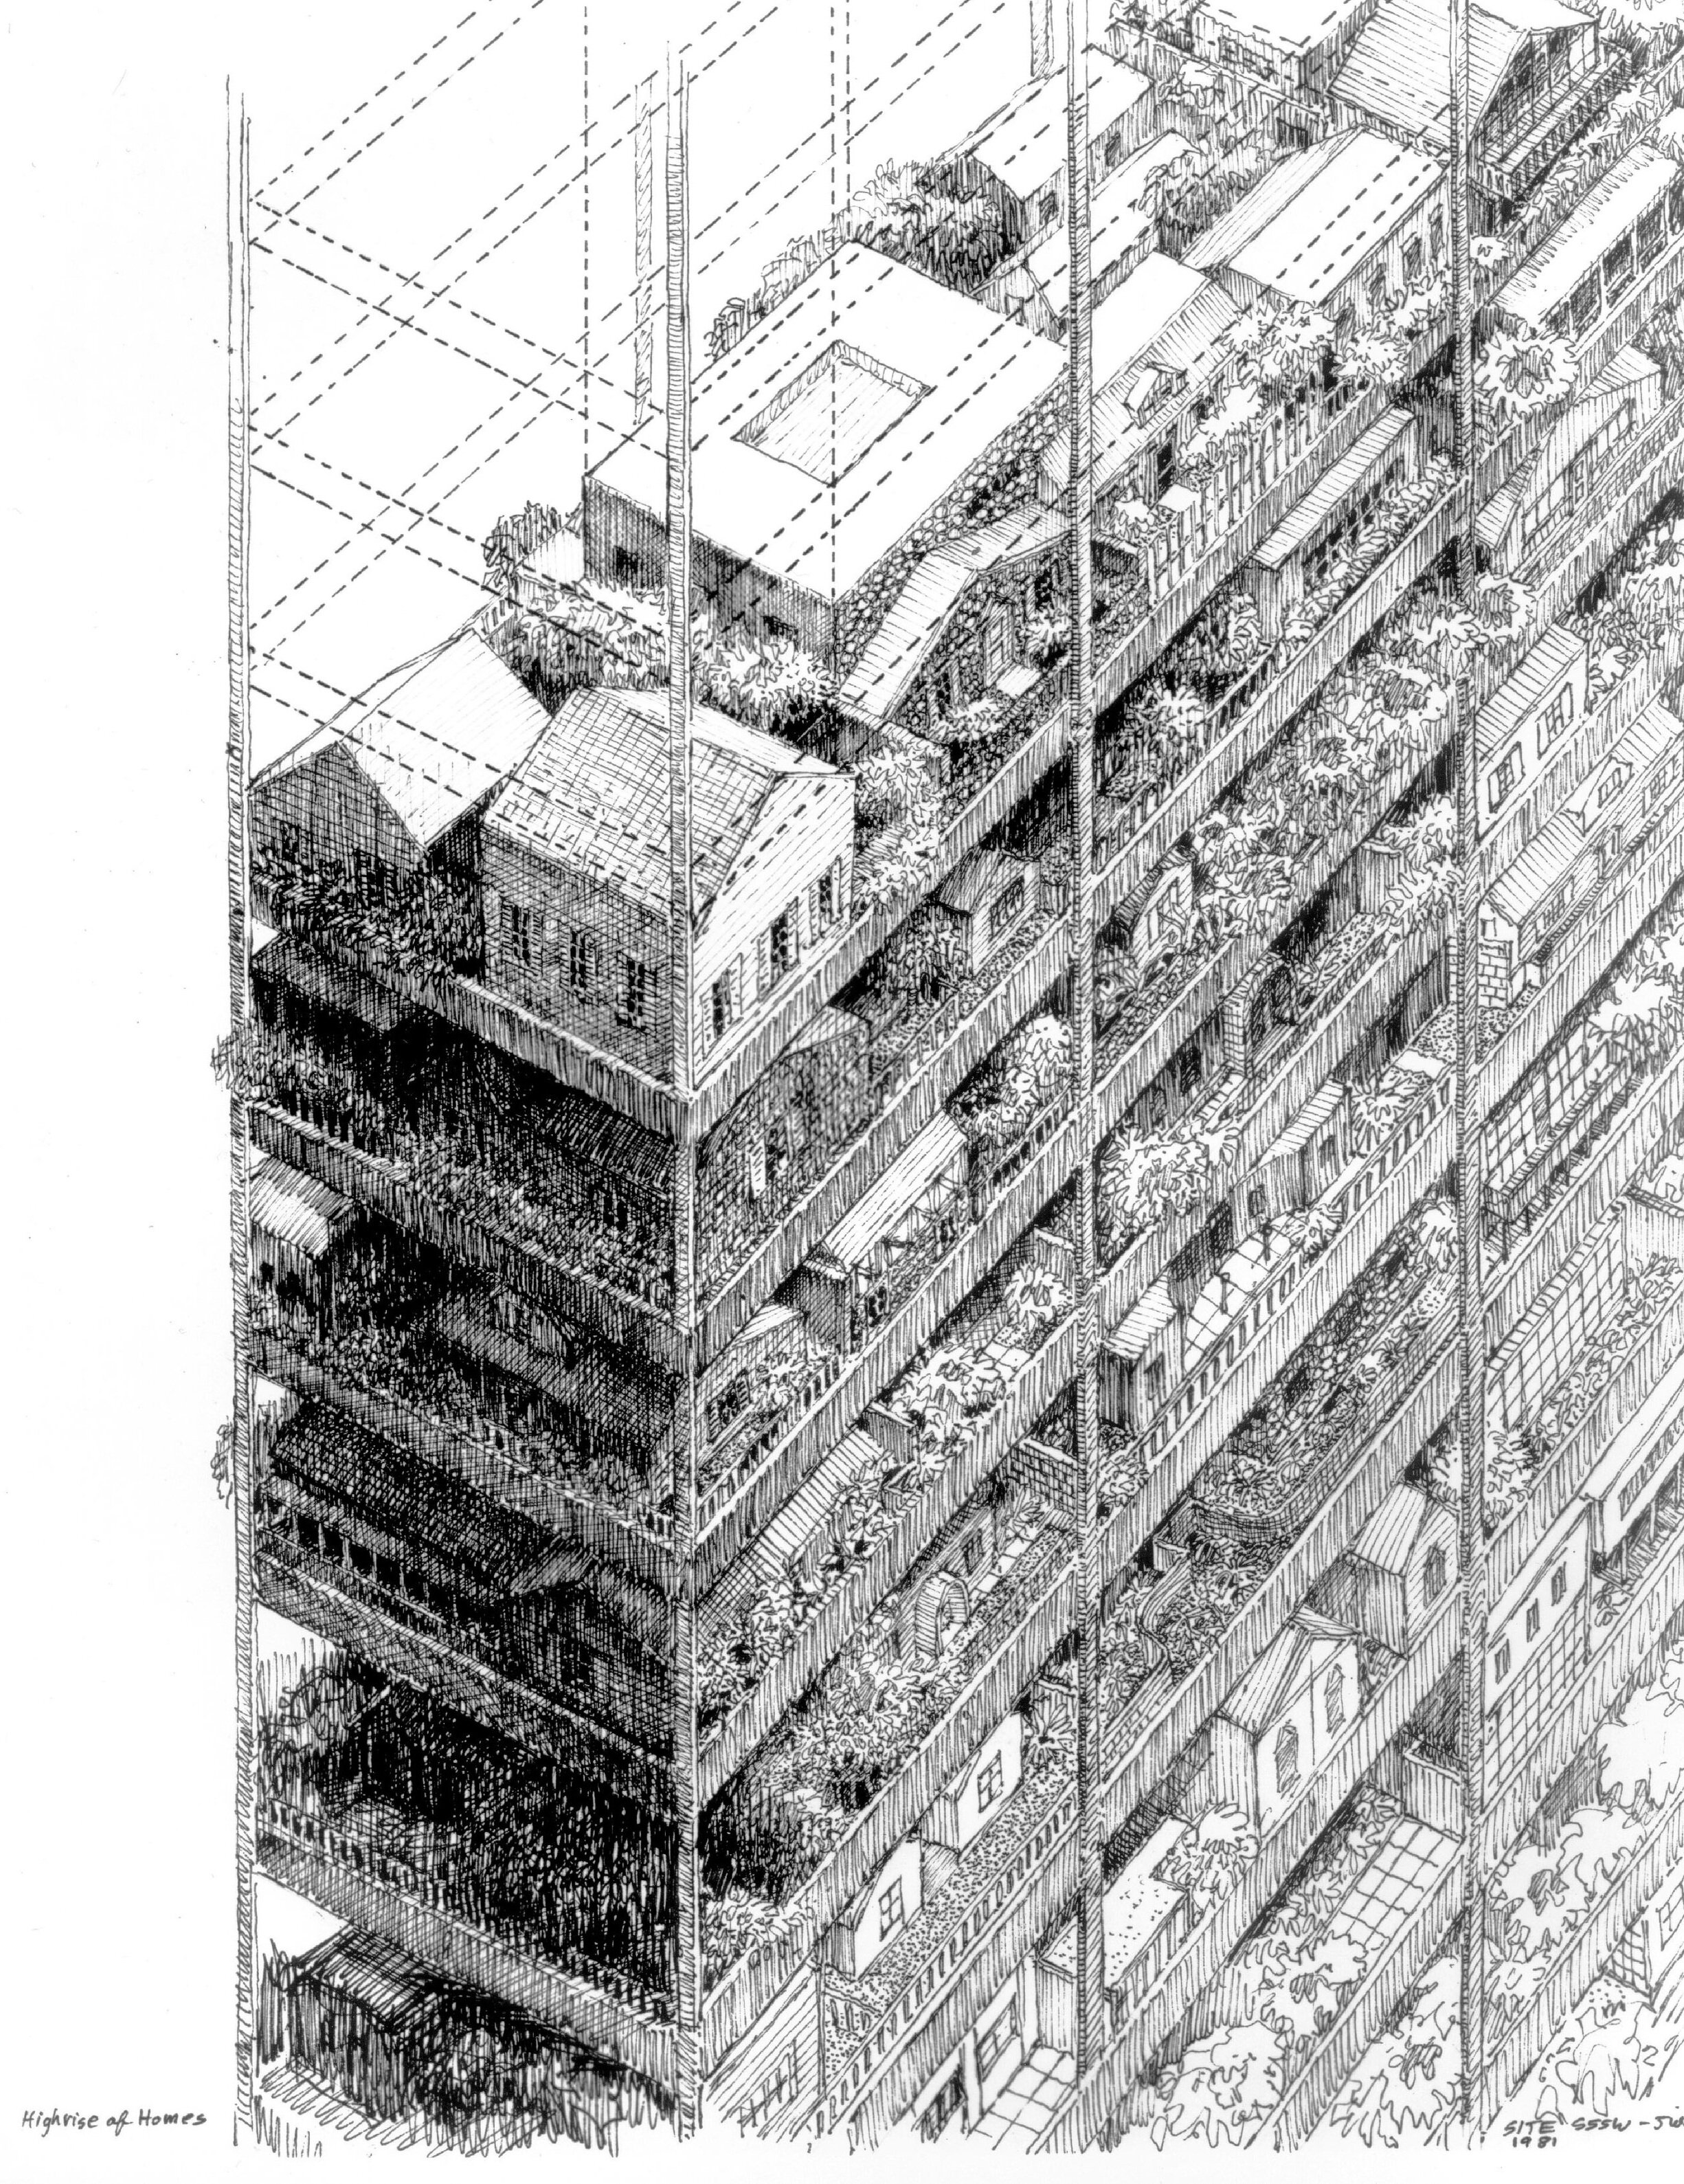 Highrise of Homes - Theoretical project by SITE for urban locations in the USA – 1981 – Axonometric drawing by J. Wines, showing individual floor space occupancy with random choices of gardens and home façades.